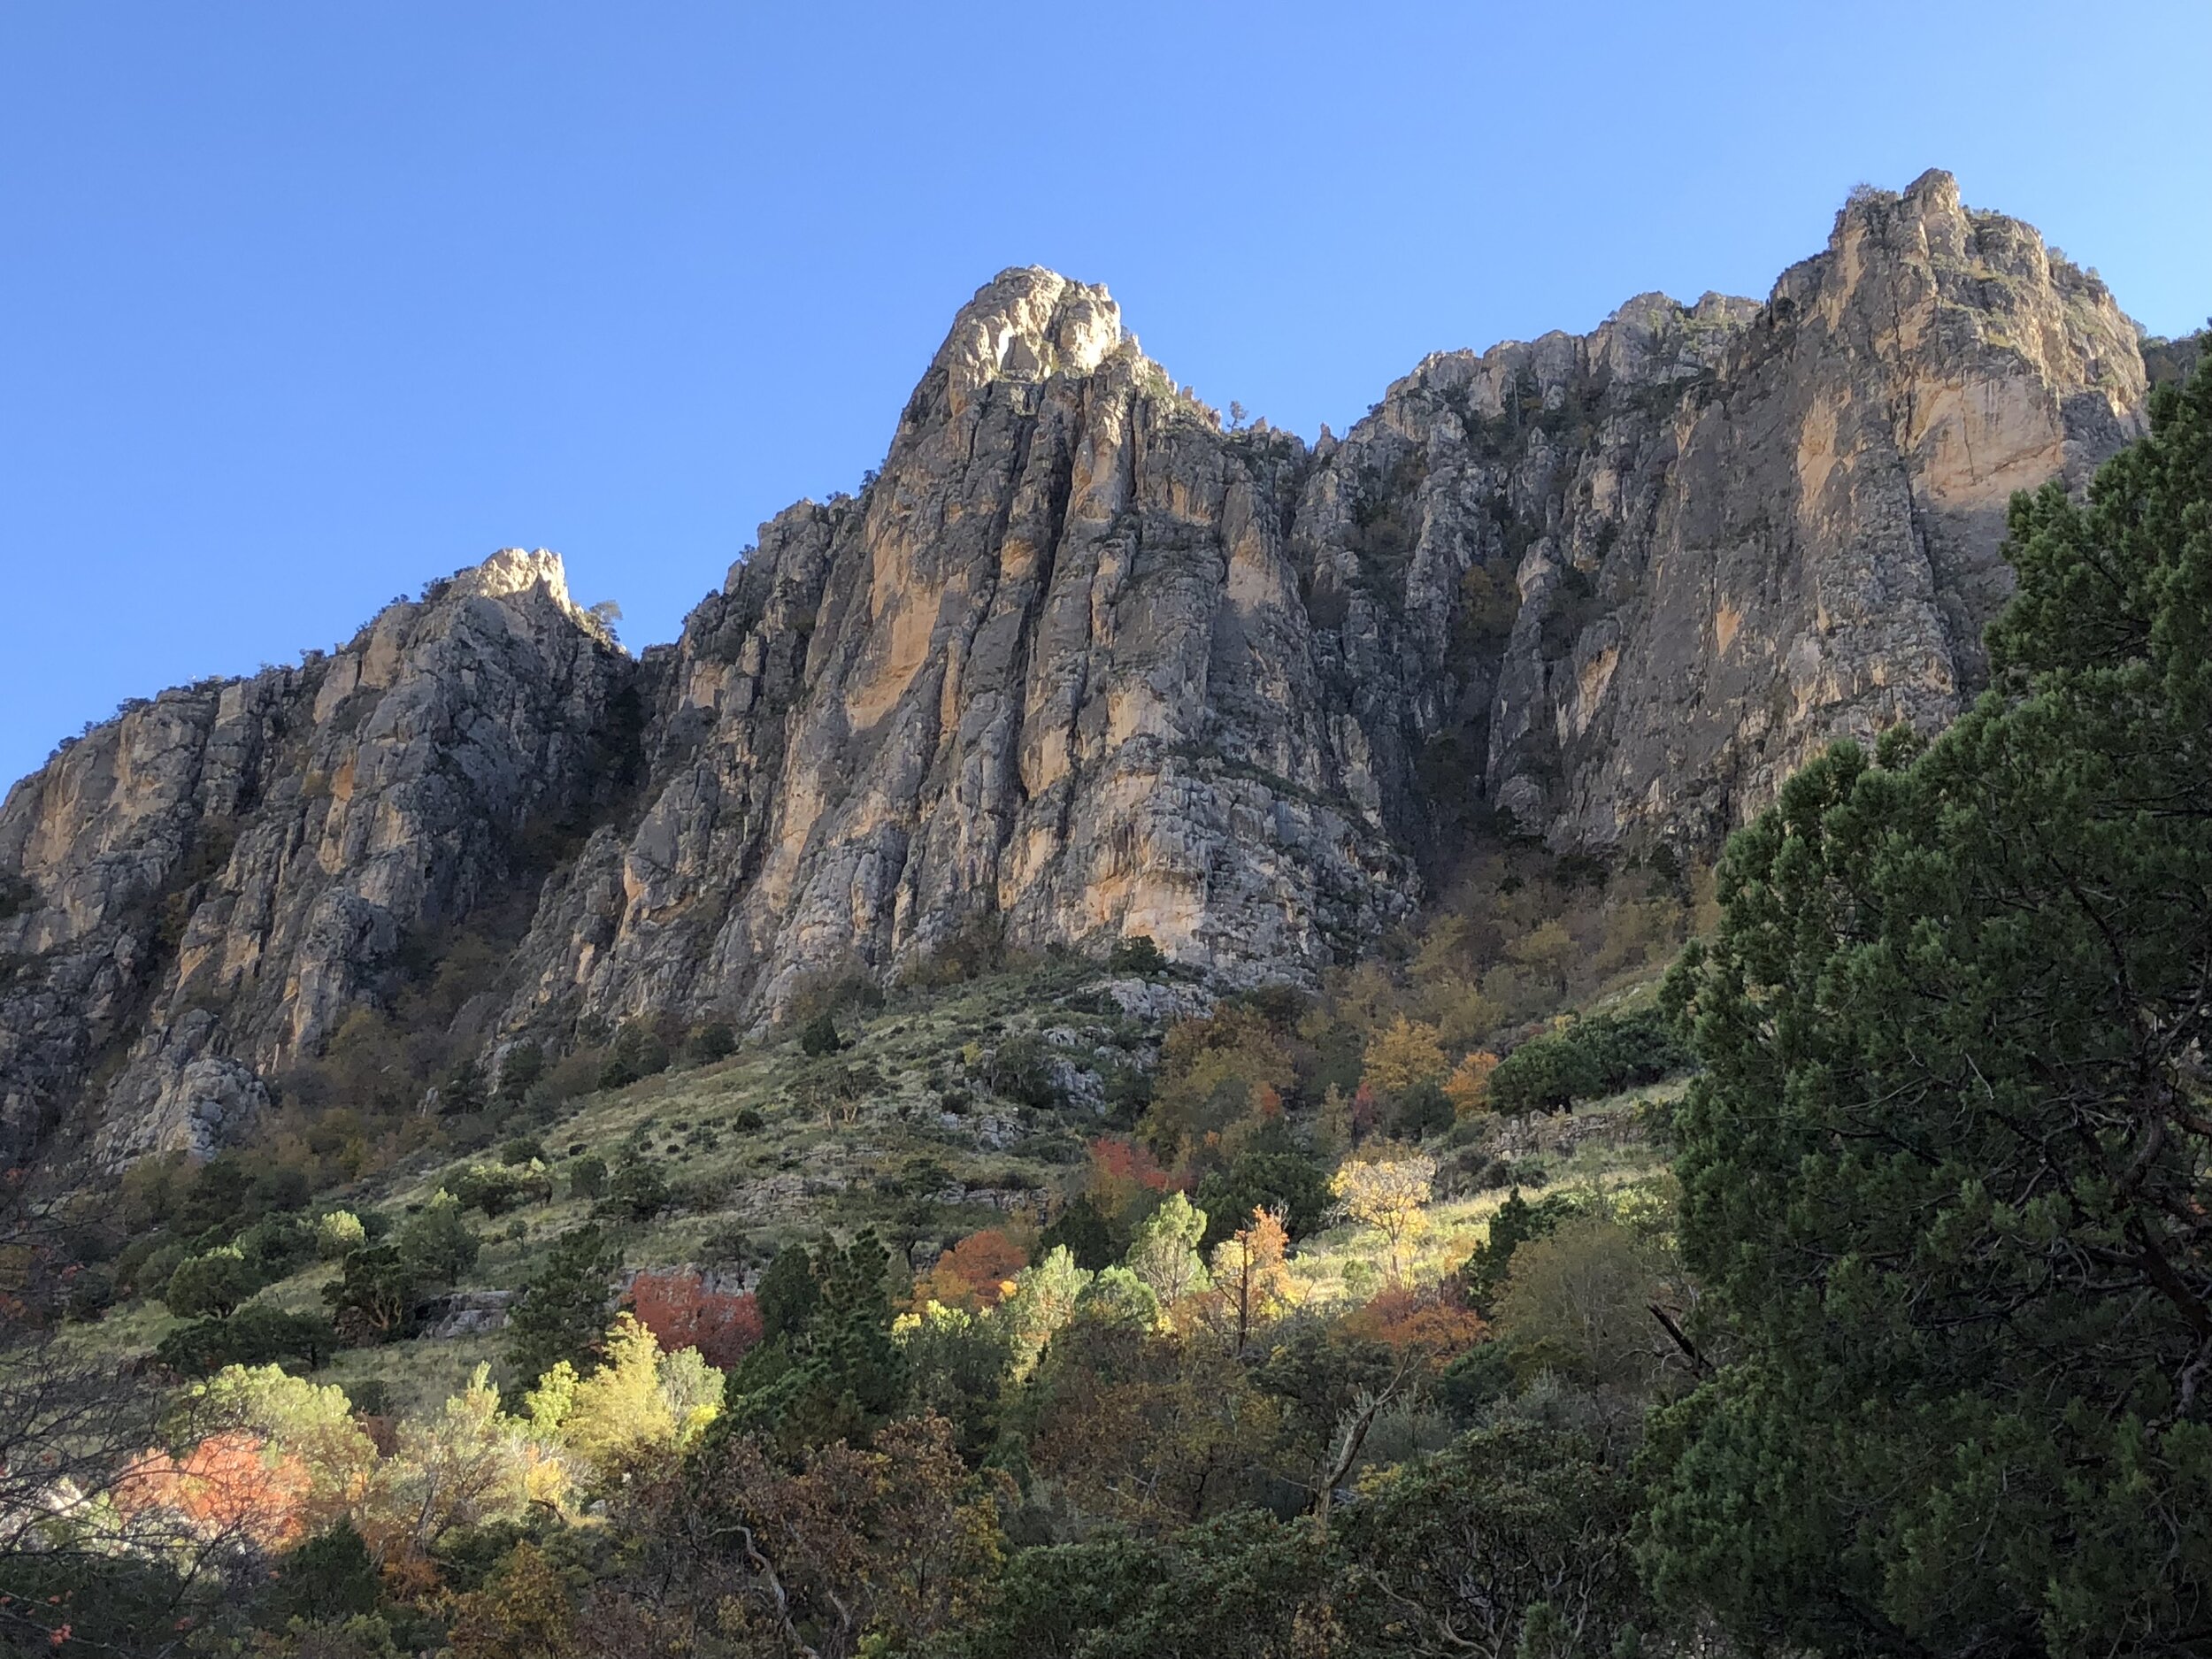 The Guadalupe Mountains are an improbable fossil reef left behind by an ancient sea.